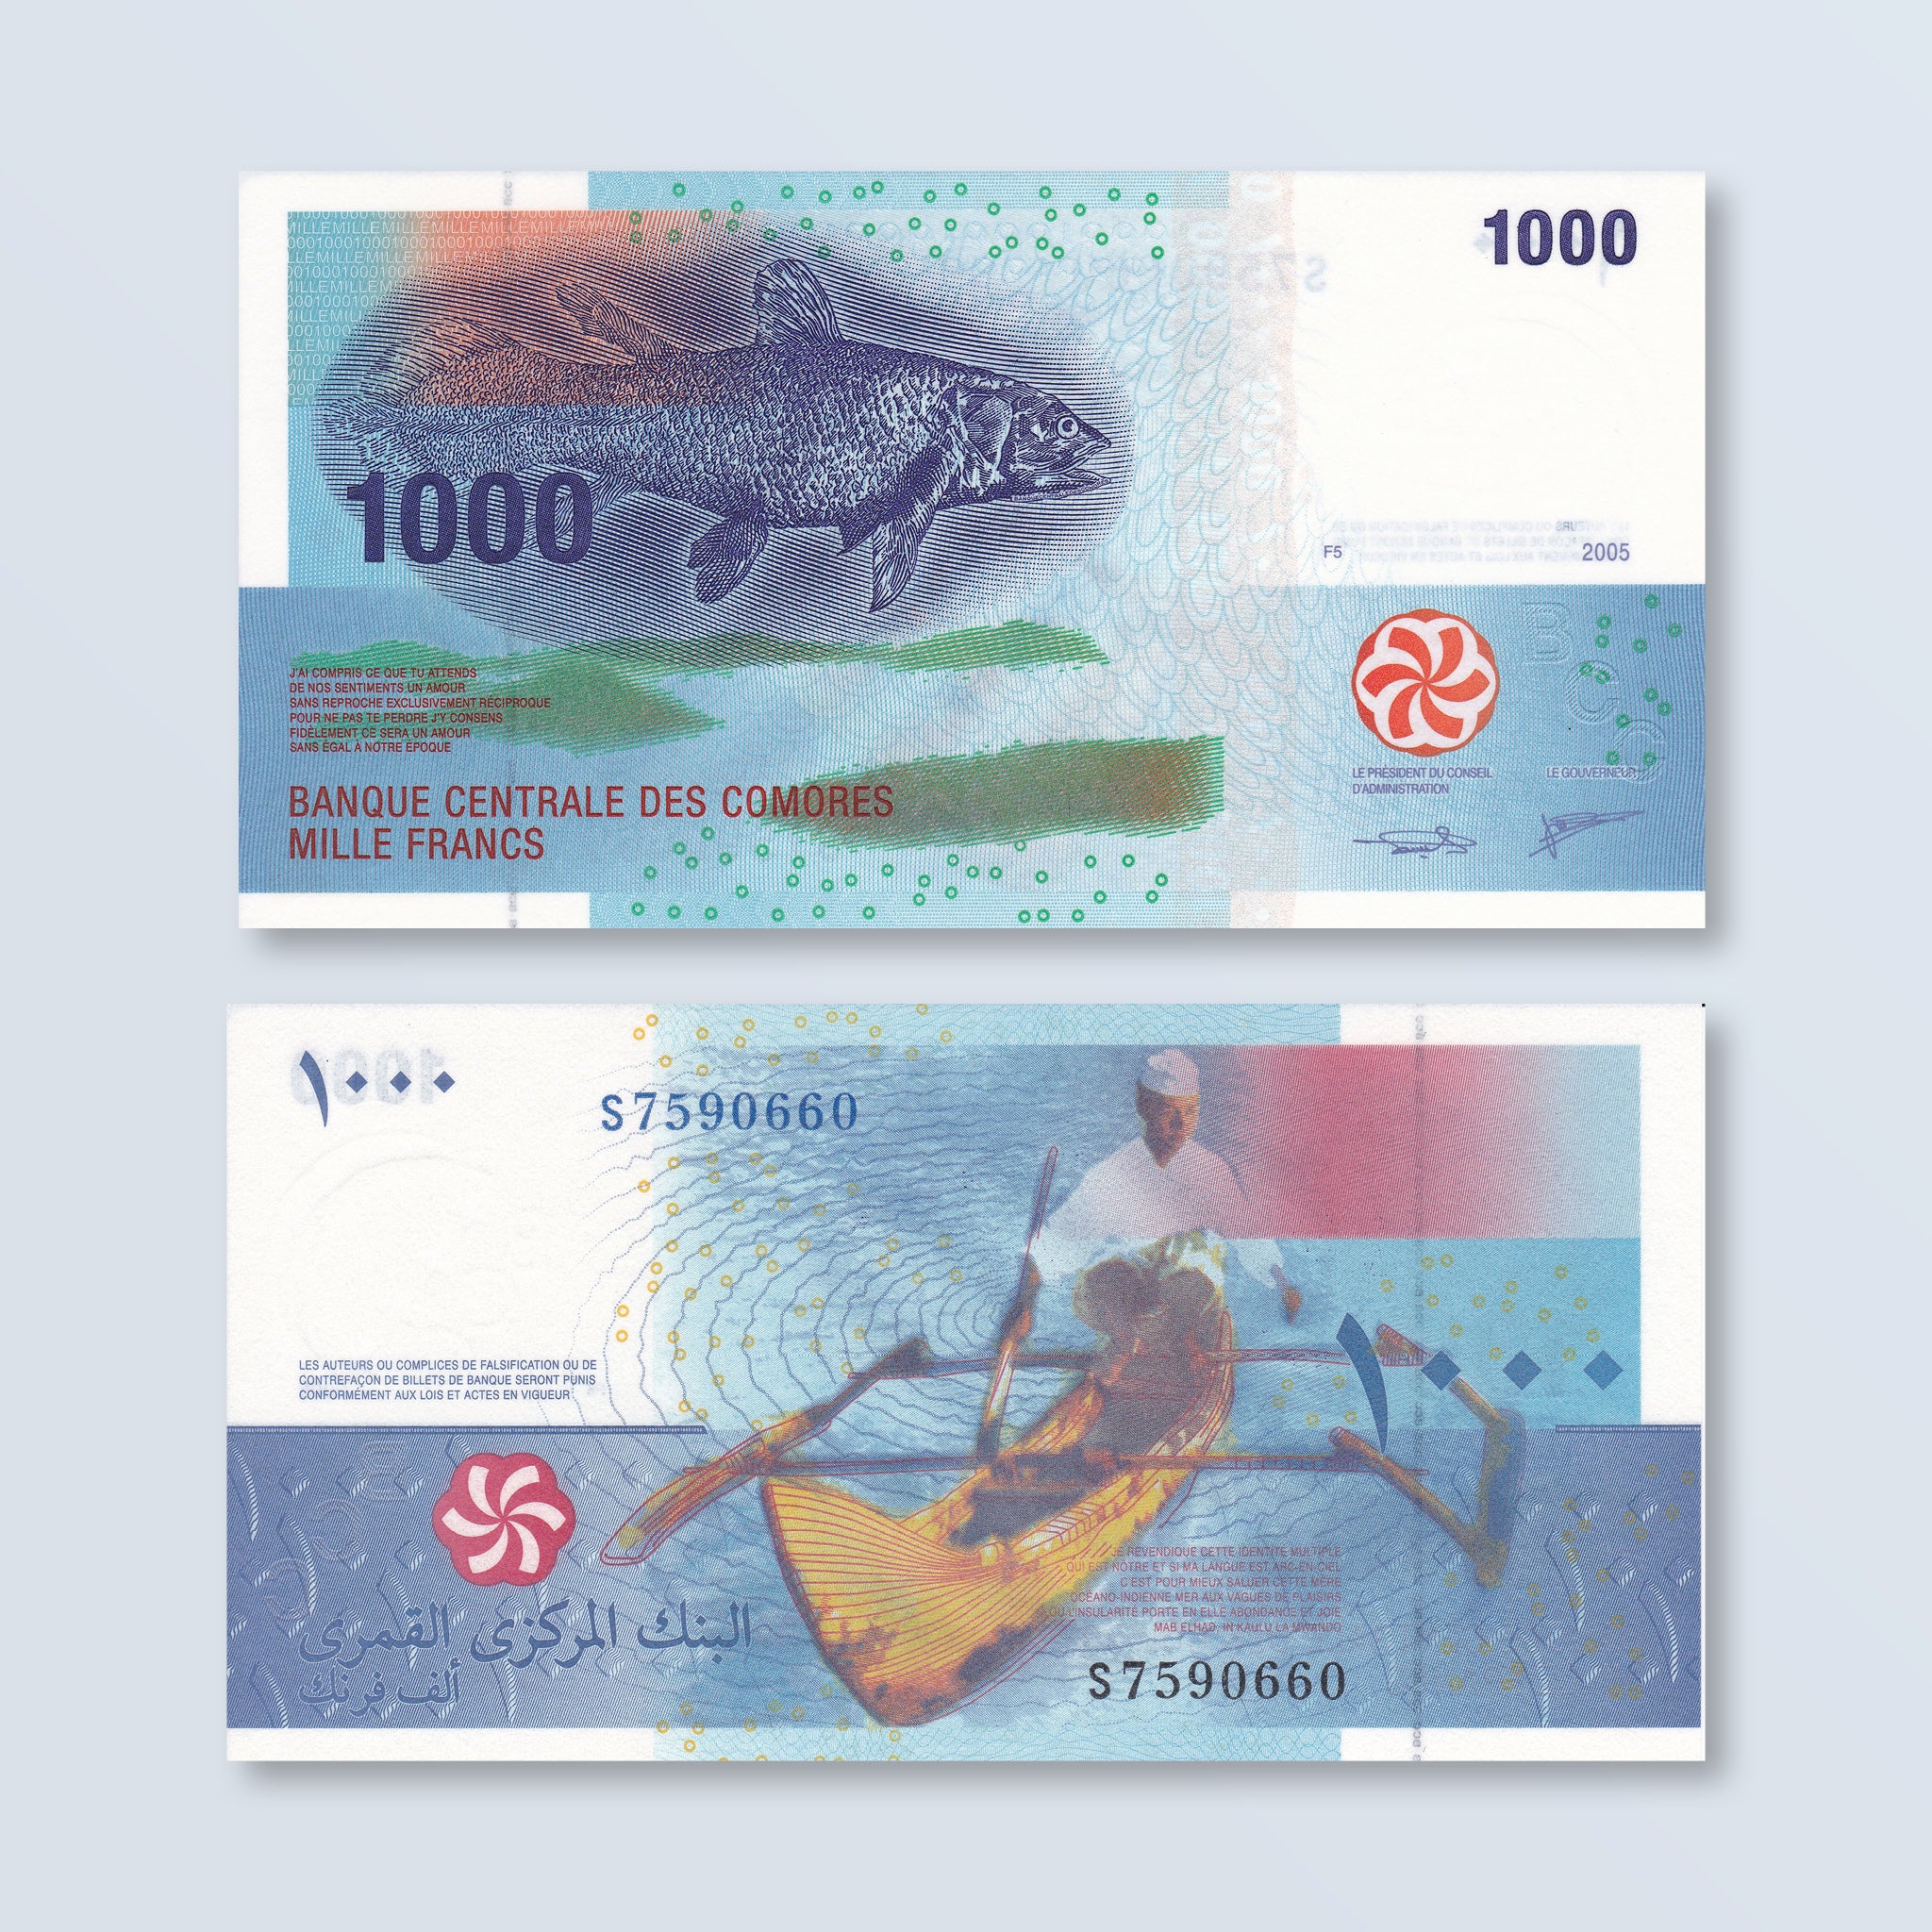 Comoros 1000 Francs, 2005 (2020), B307c, P16, IBNS Banknote of the Year 2006, UNC - Robert's World Money - World Banknotes